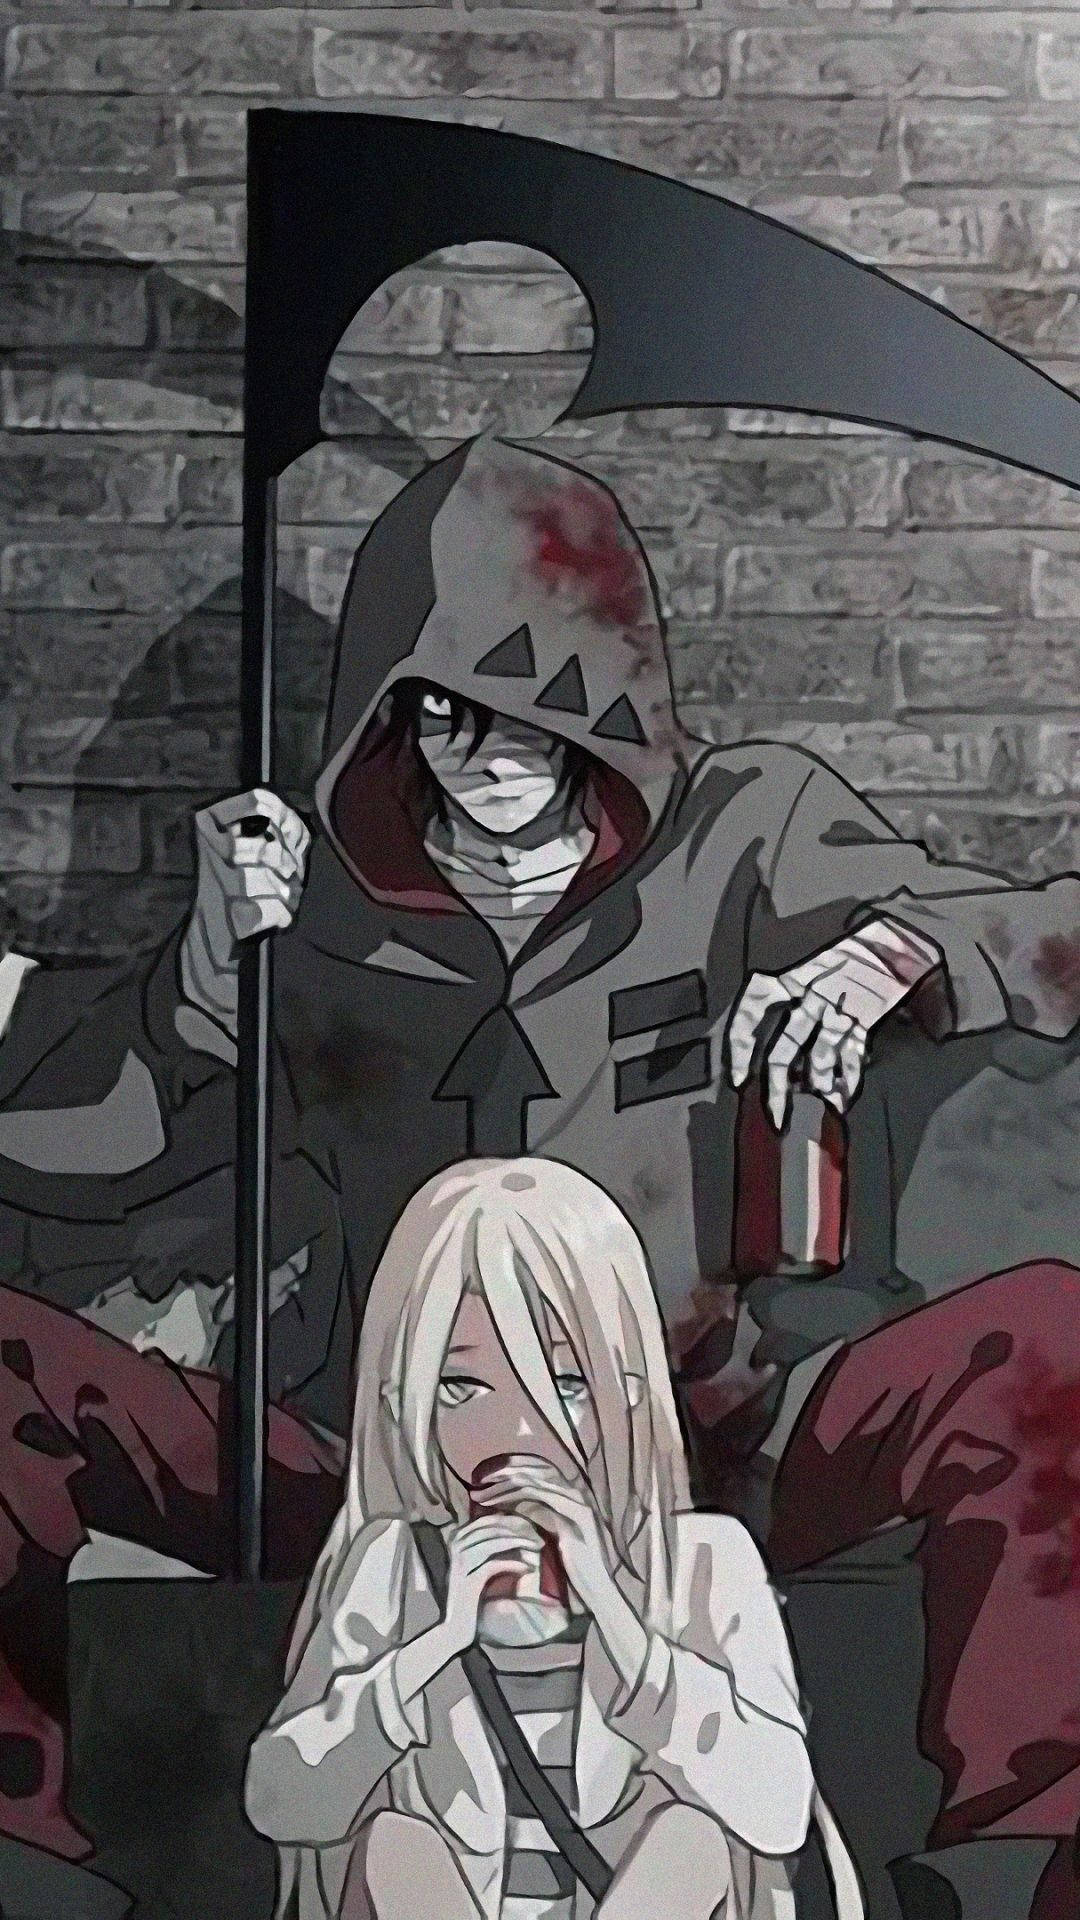 Rachel Gardner and Isaac Foster, two extraordinary souls from Angels of Death Wallpaper